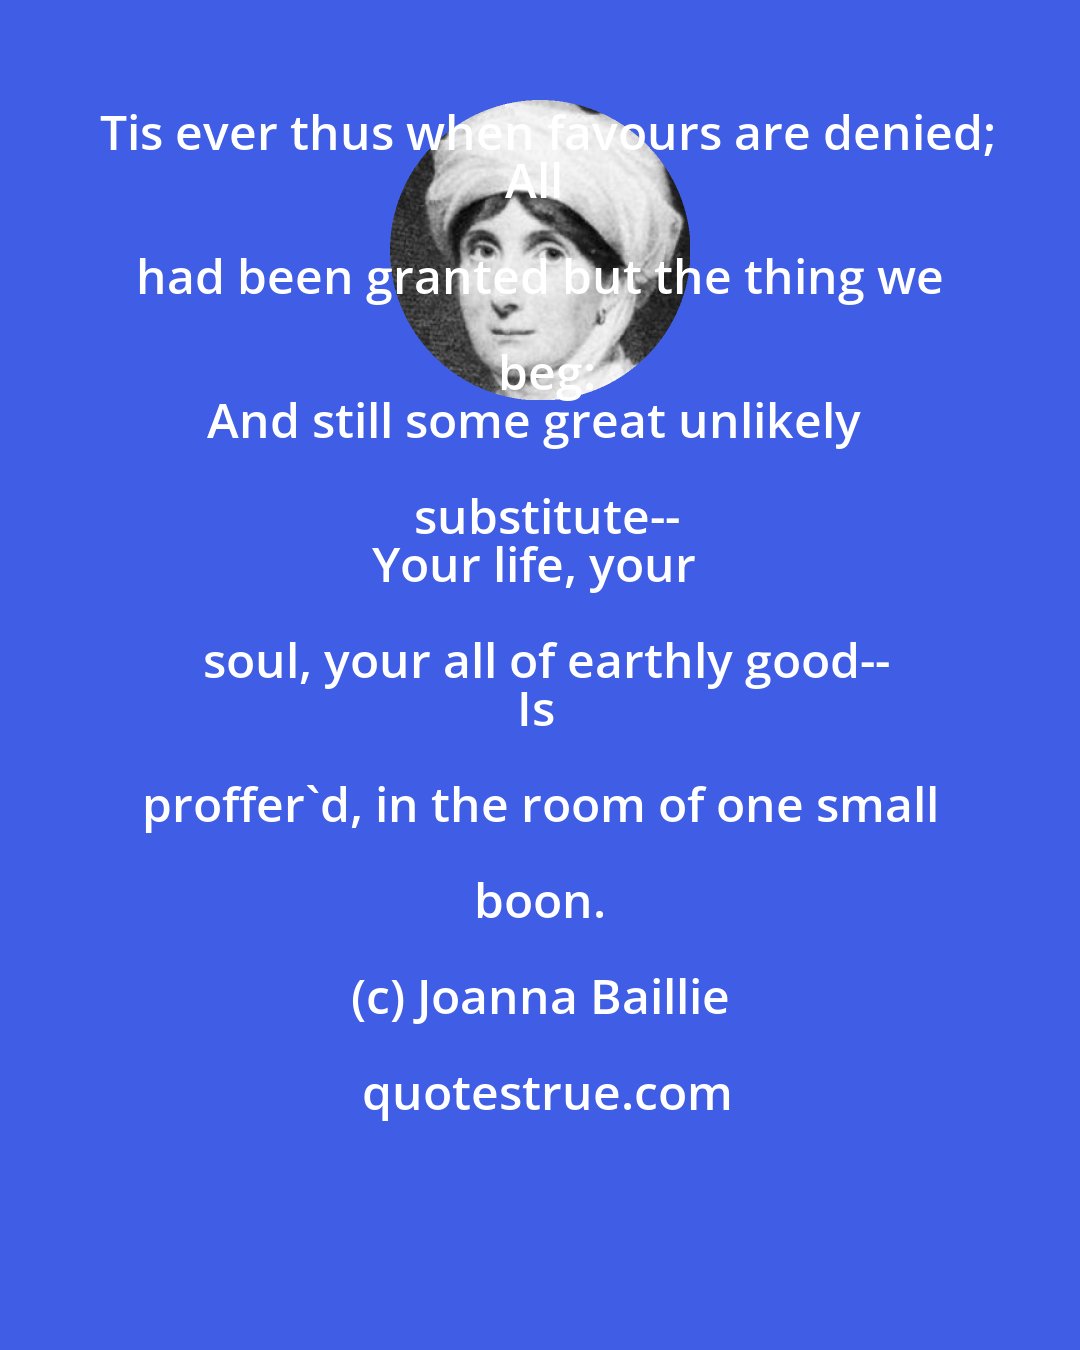 Joanna Baillie: Tis ever thus when favours are denied;
All had been granted but the thing we beg:
And still some great unlikely substitute--
Your life, your soul, your all of earthly good--
Is proffer'd, in the room of one small boon.